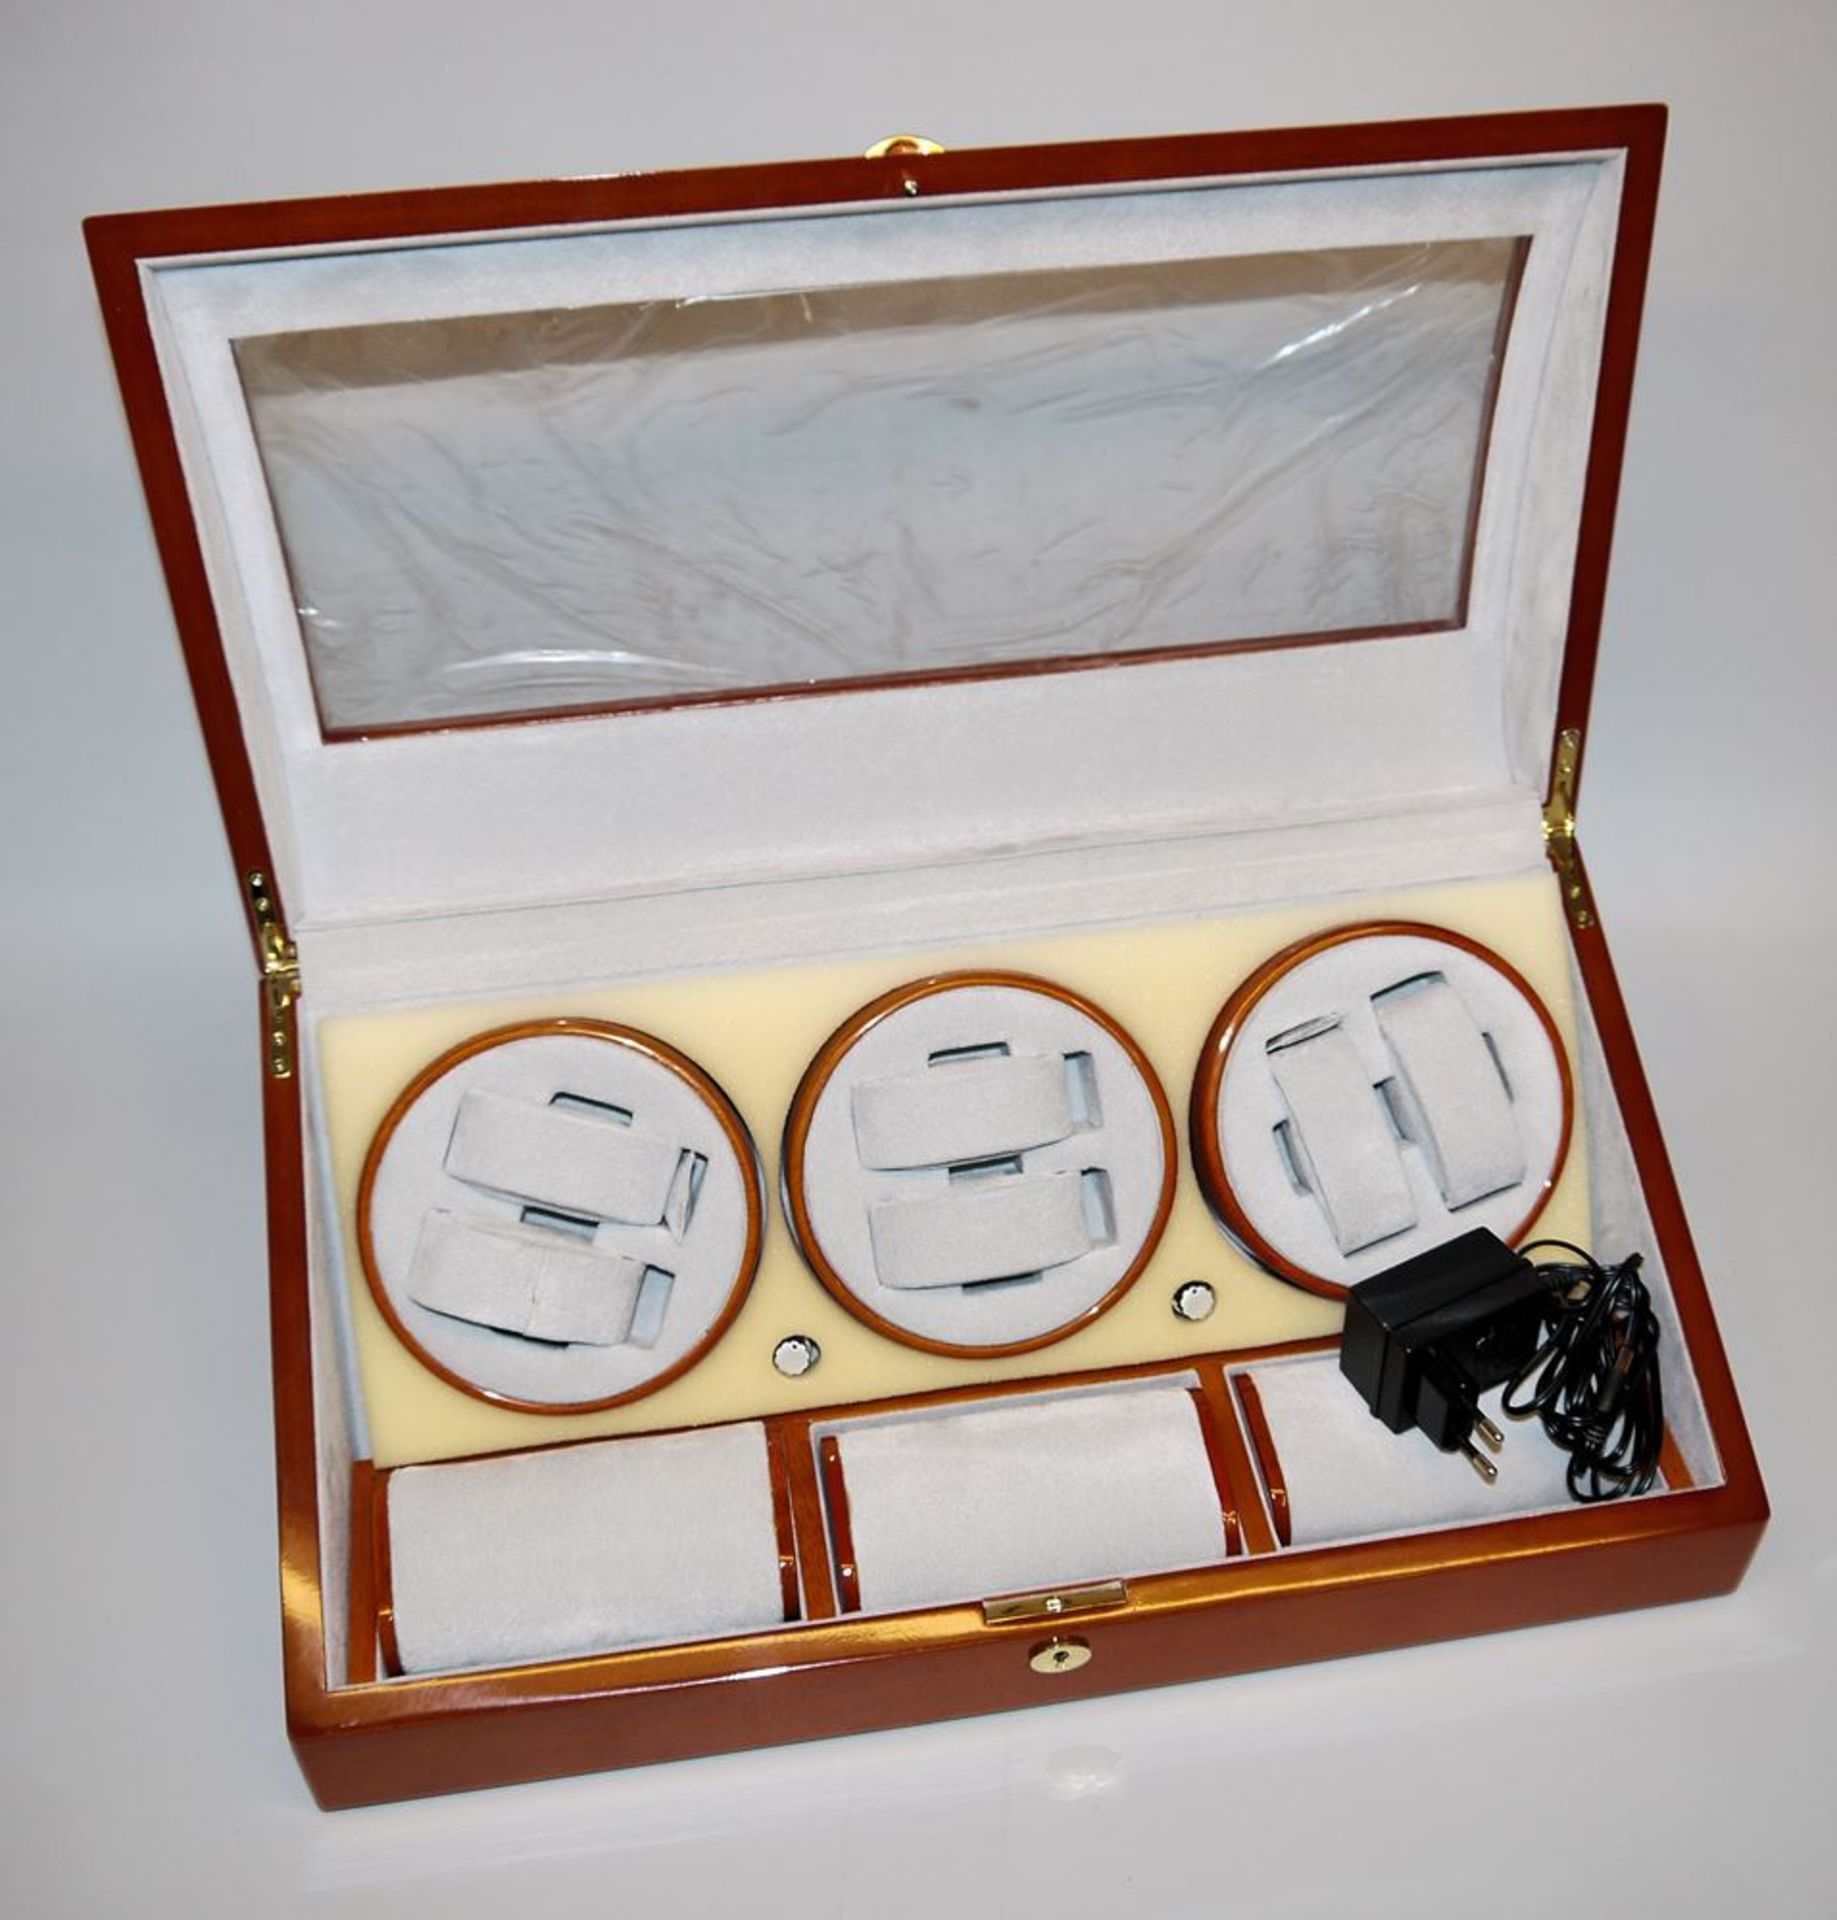 Rothenschild watch winder for 6 automatic watches, as new